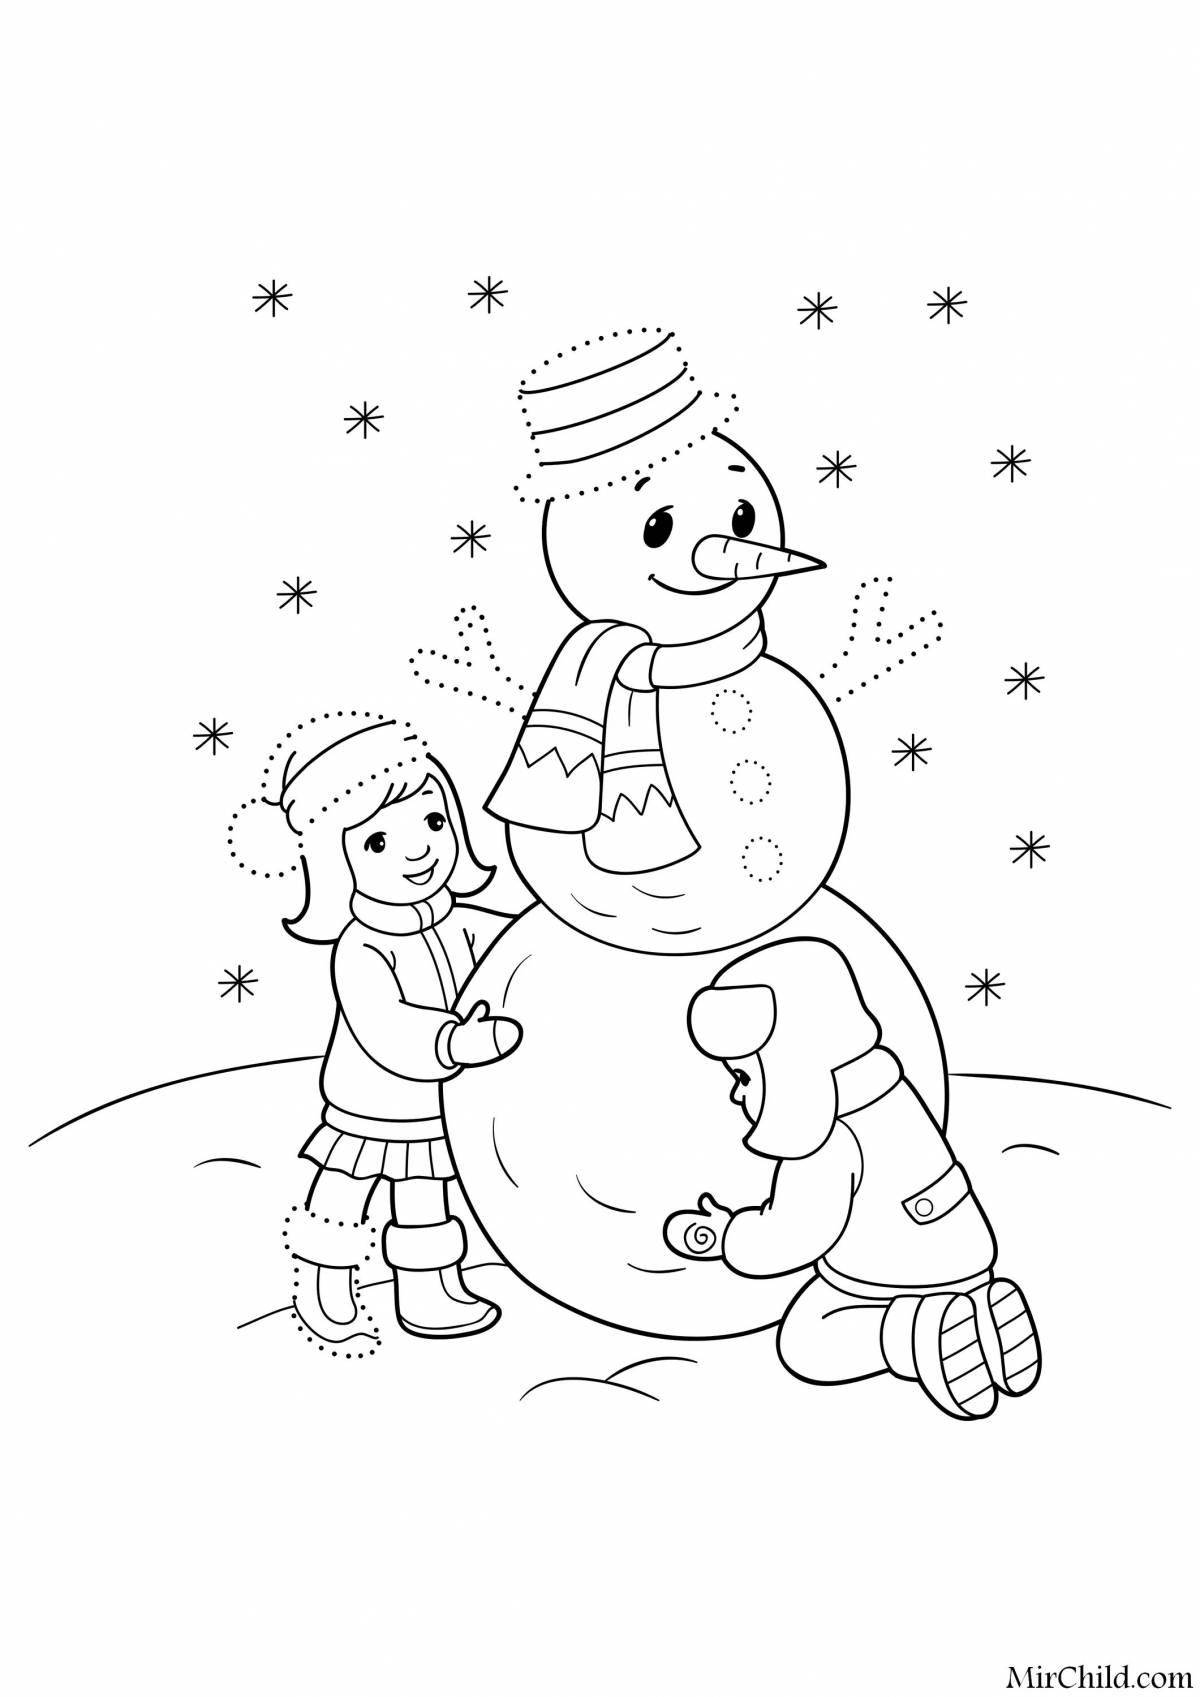 Stimulating coloring book winter fun for 6 year olds